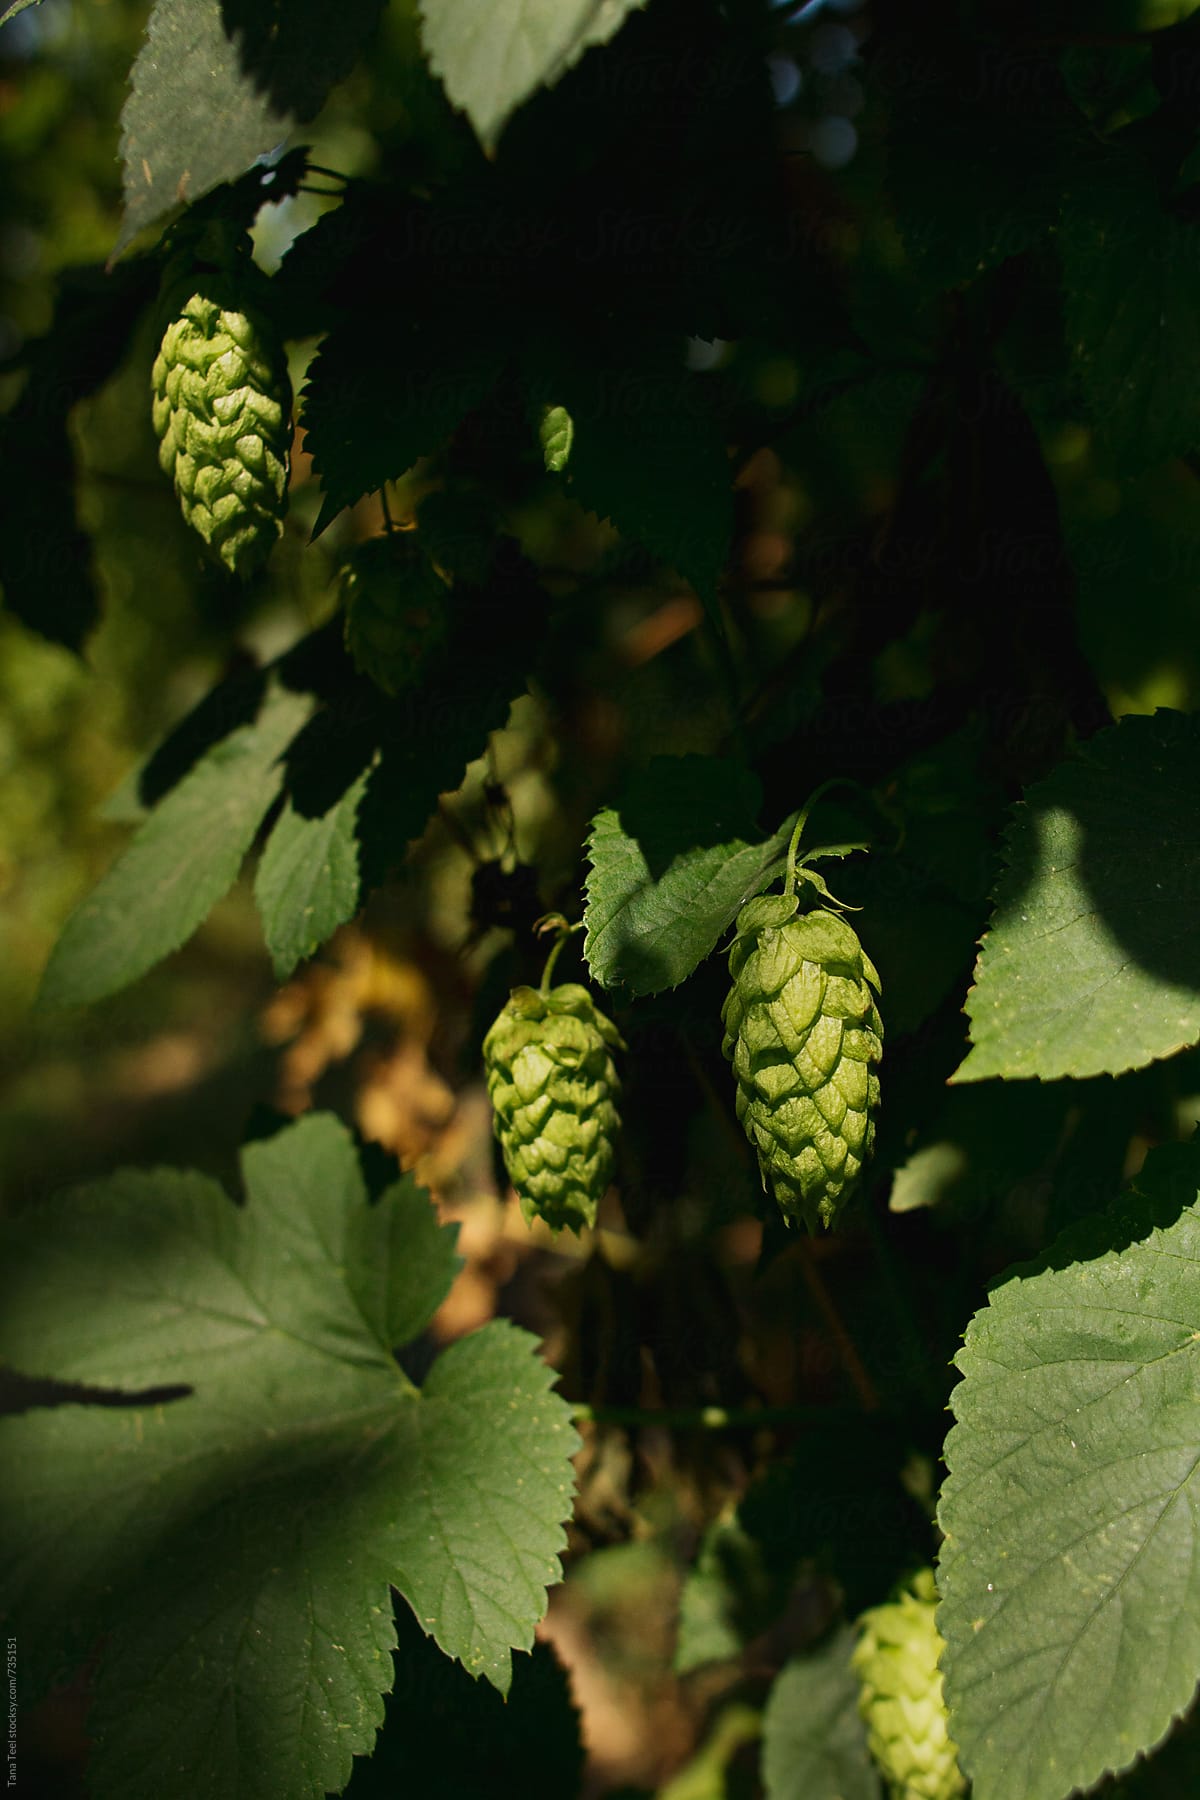 Rows of hop plants